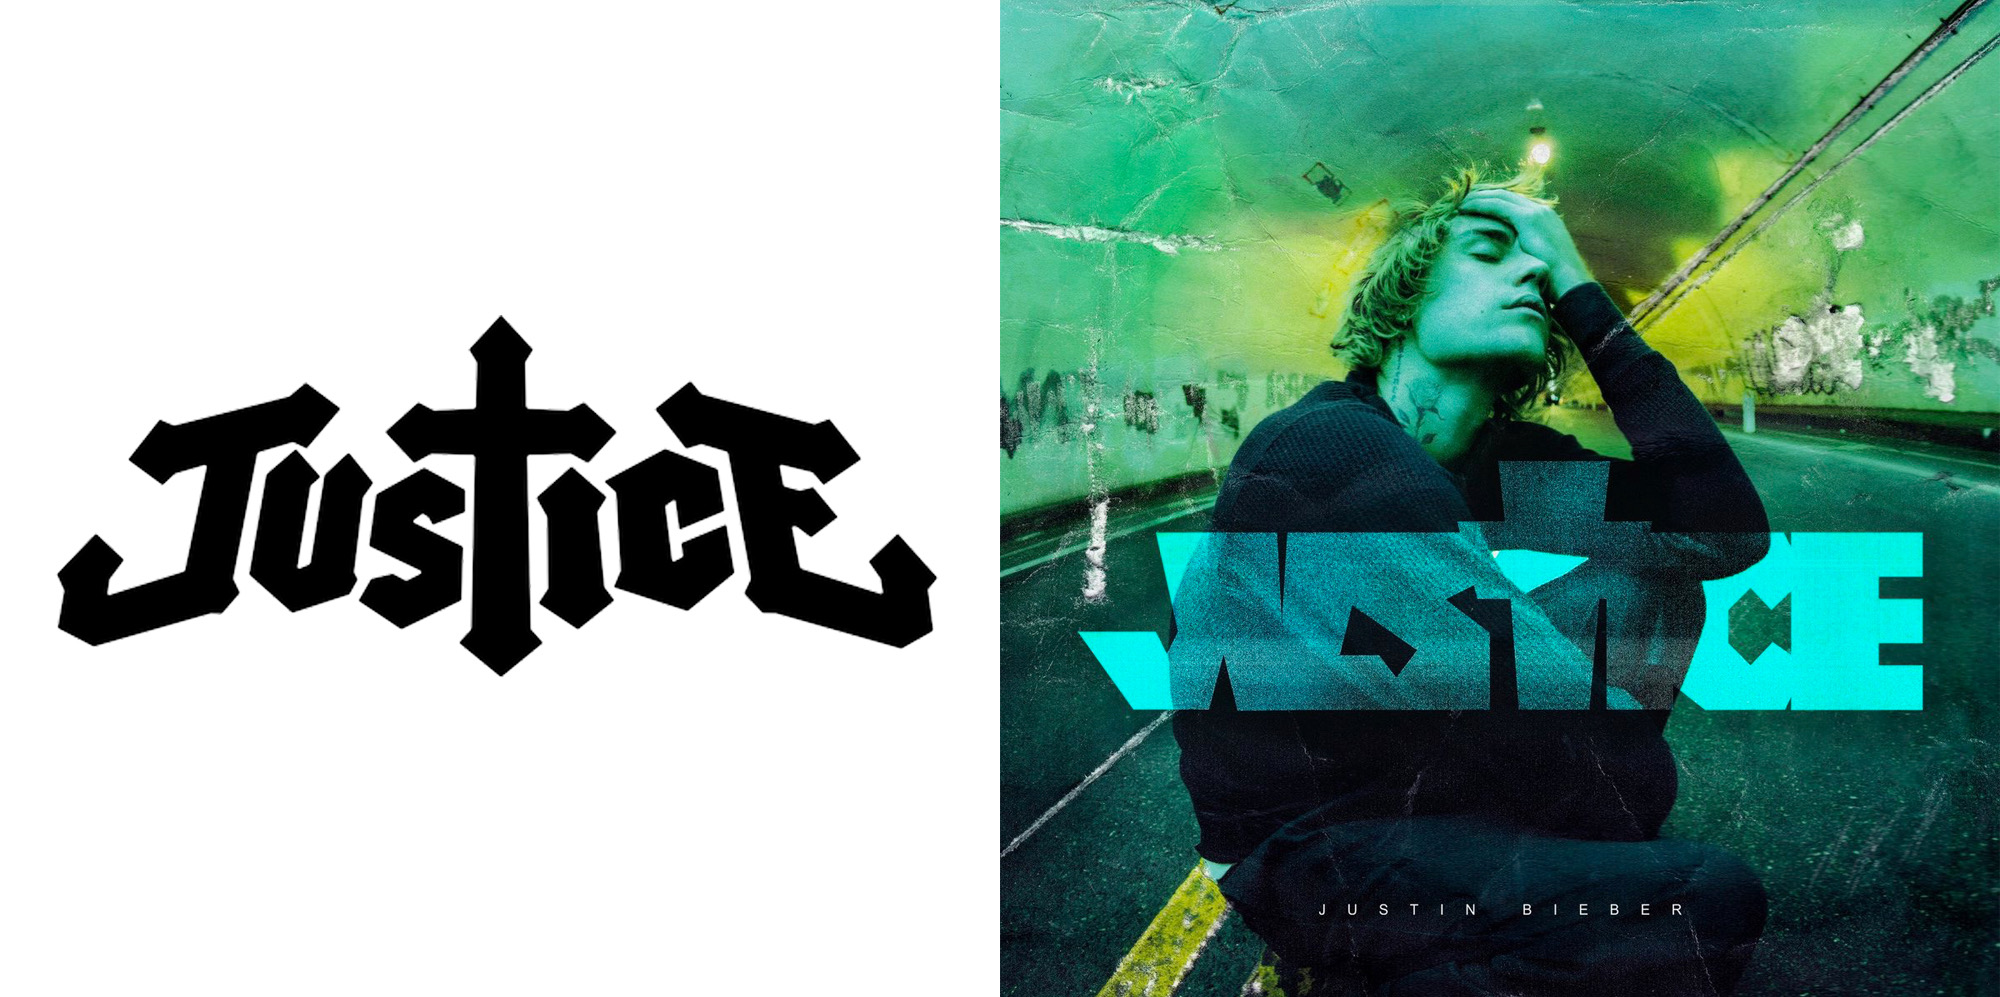 Justin Bieber's 'Justice' Cover Looks Like Justice's Logo